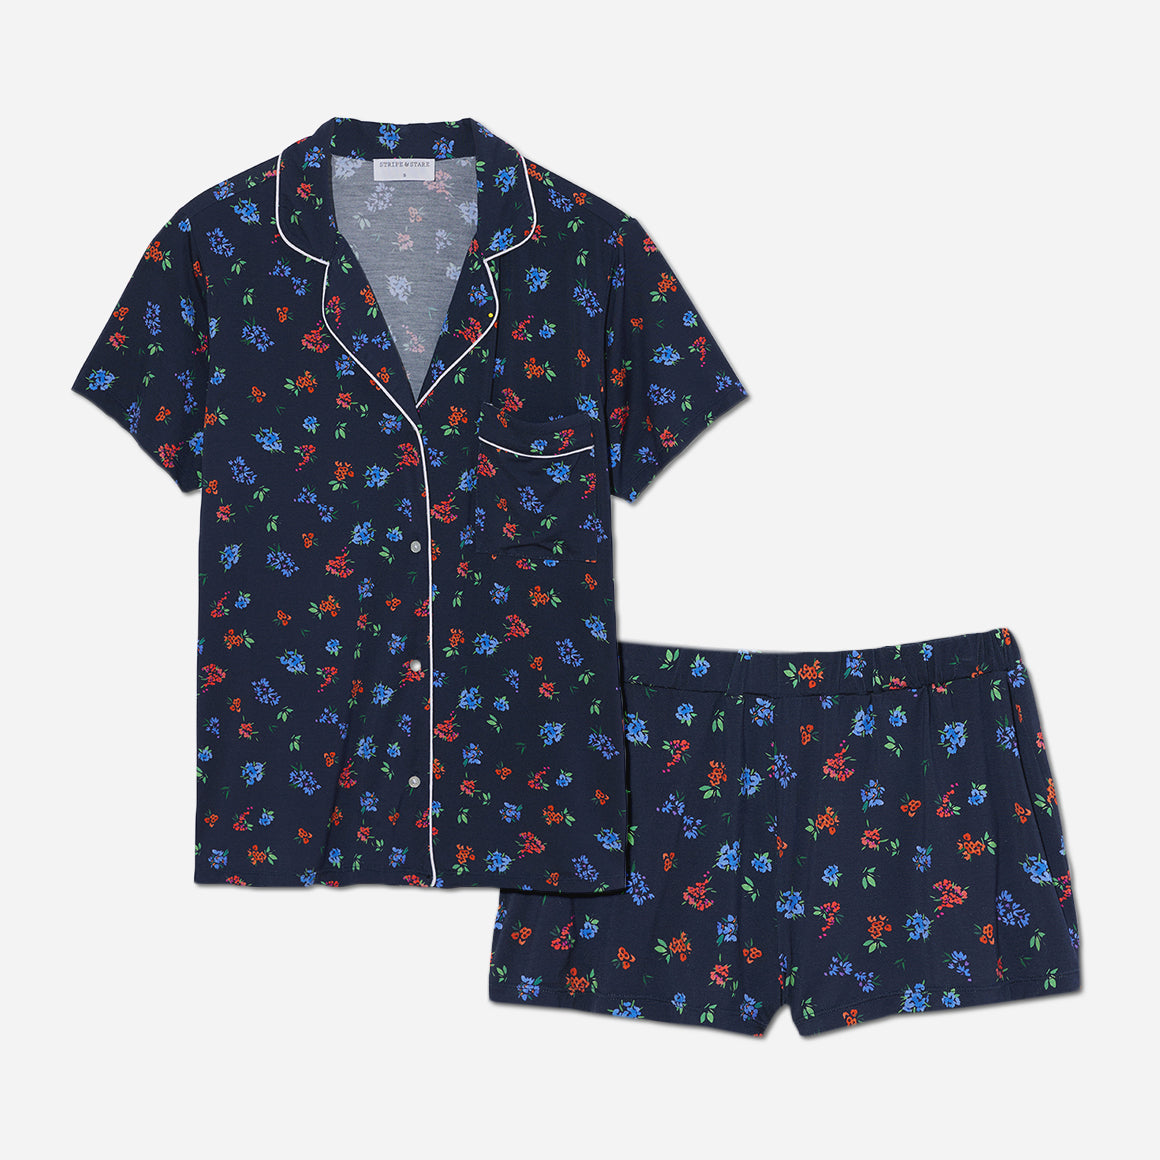 The timeless design of this short pajama set is accentuated by its tailored cut and refined detailing. The button-down front allows for easy wearing and effortless style, while the matching shorts feature an elastic waistband that provides a customized fit.